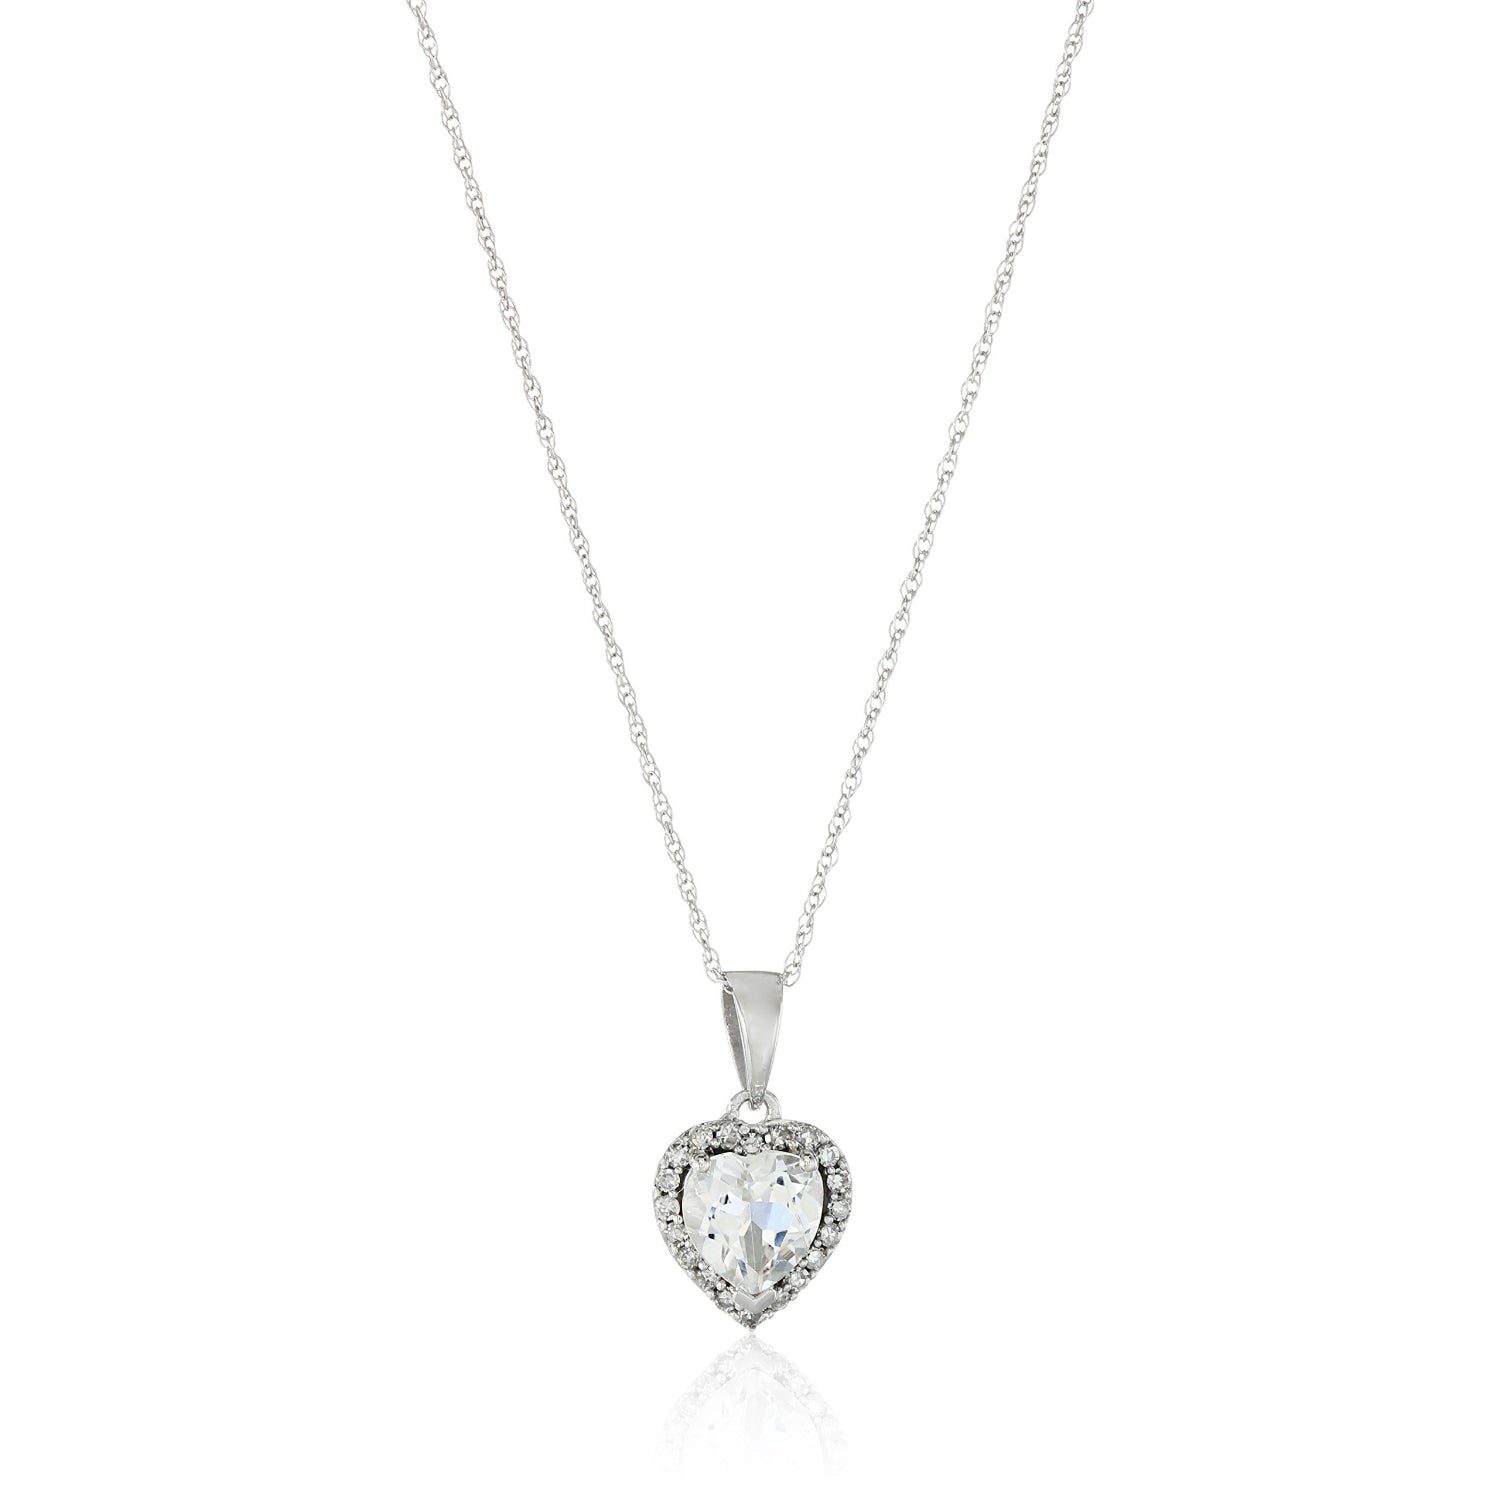 10k White Gold White Topaz Heart and Diamond Pendant Necklace, (1/10 cttw H-I Color, I1-I2 Clarity), 18" - pinctore